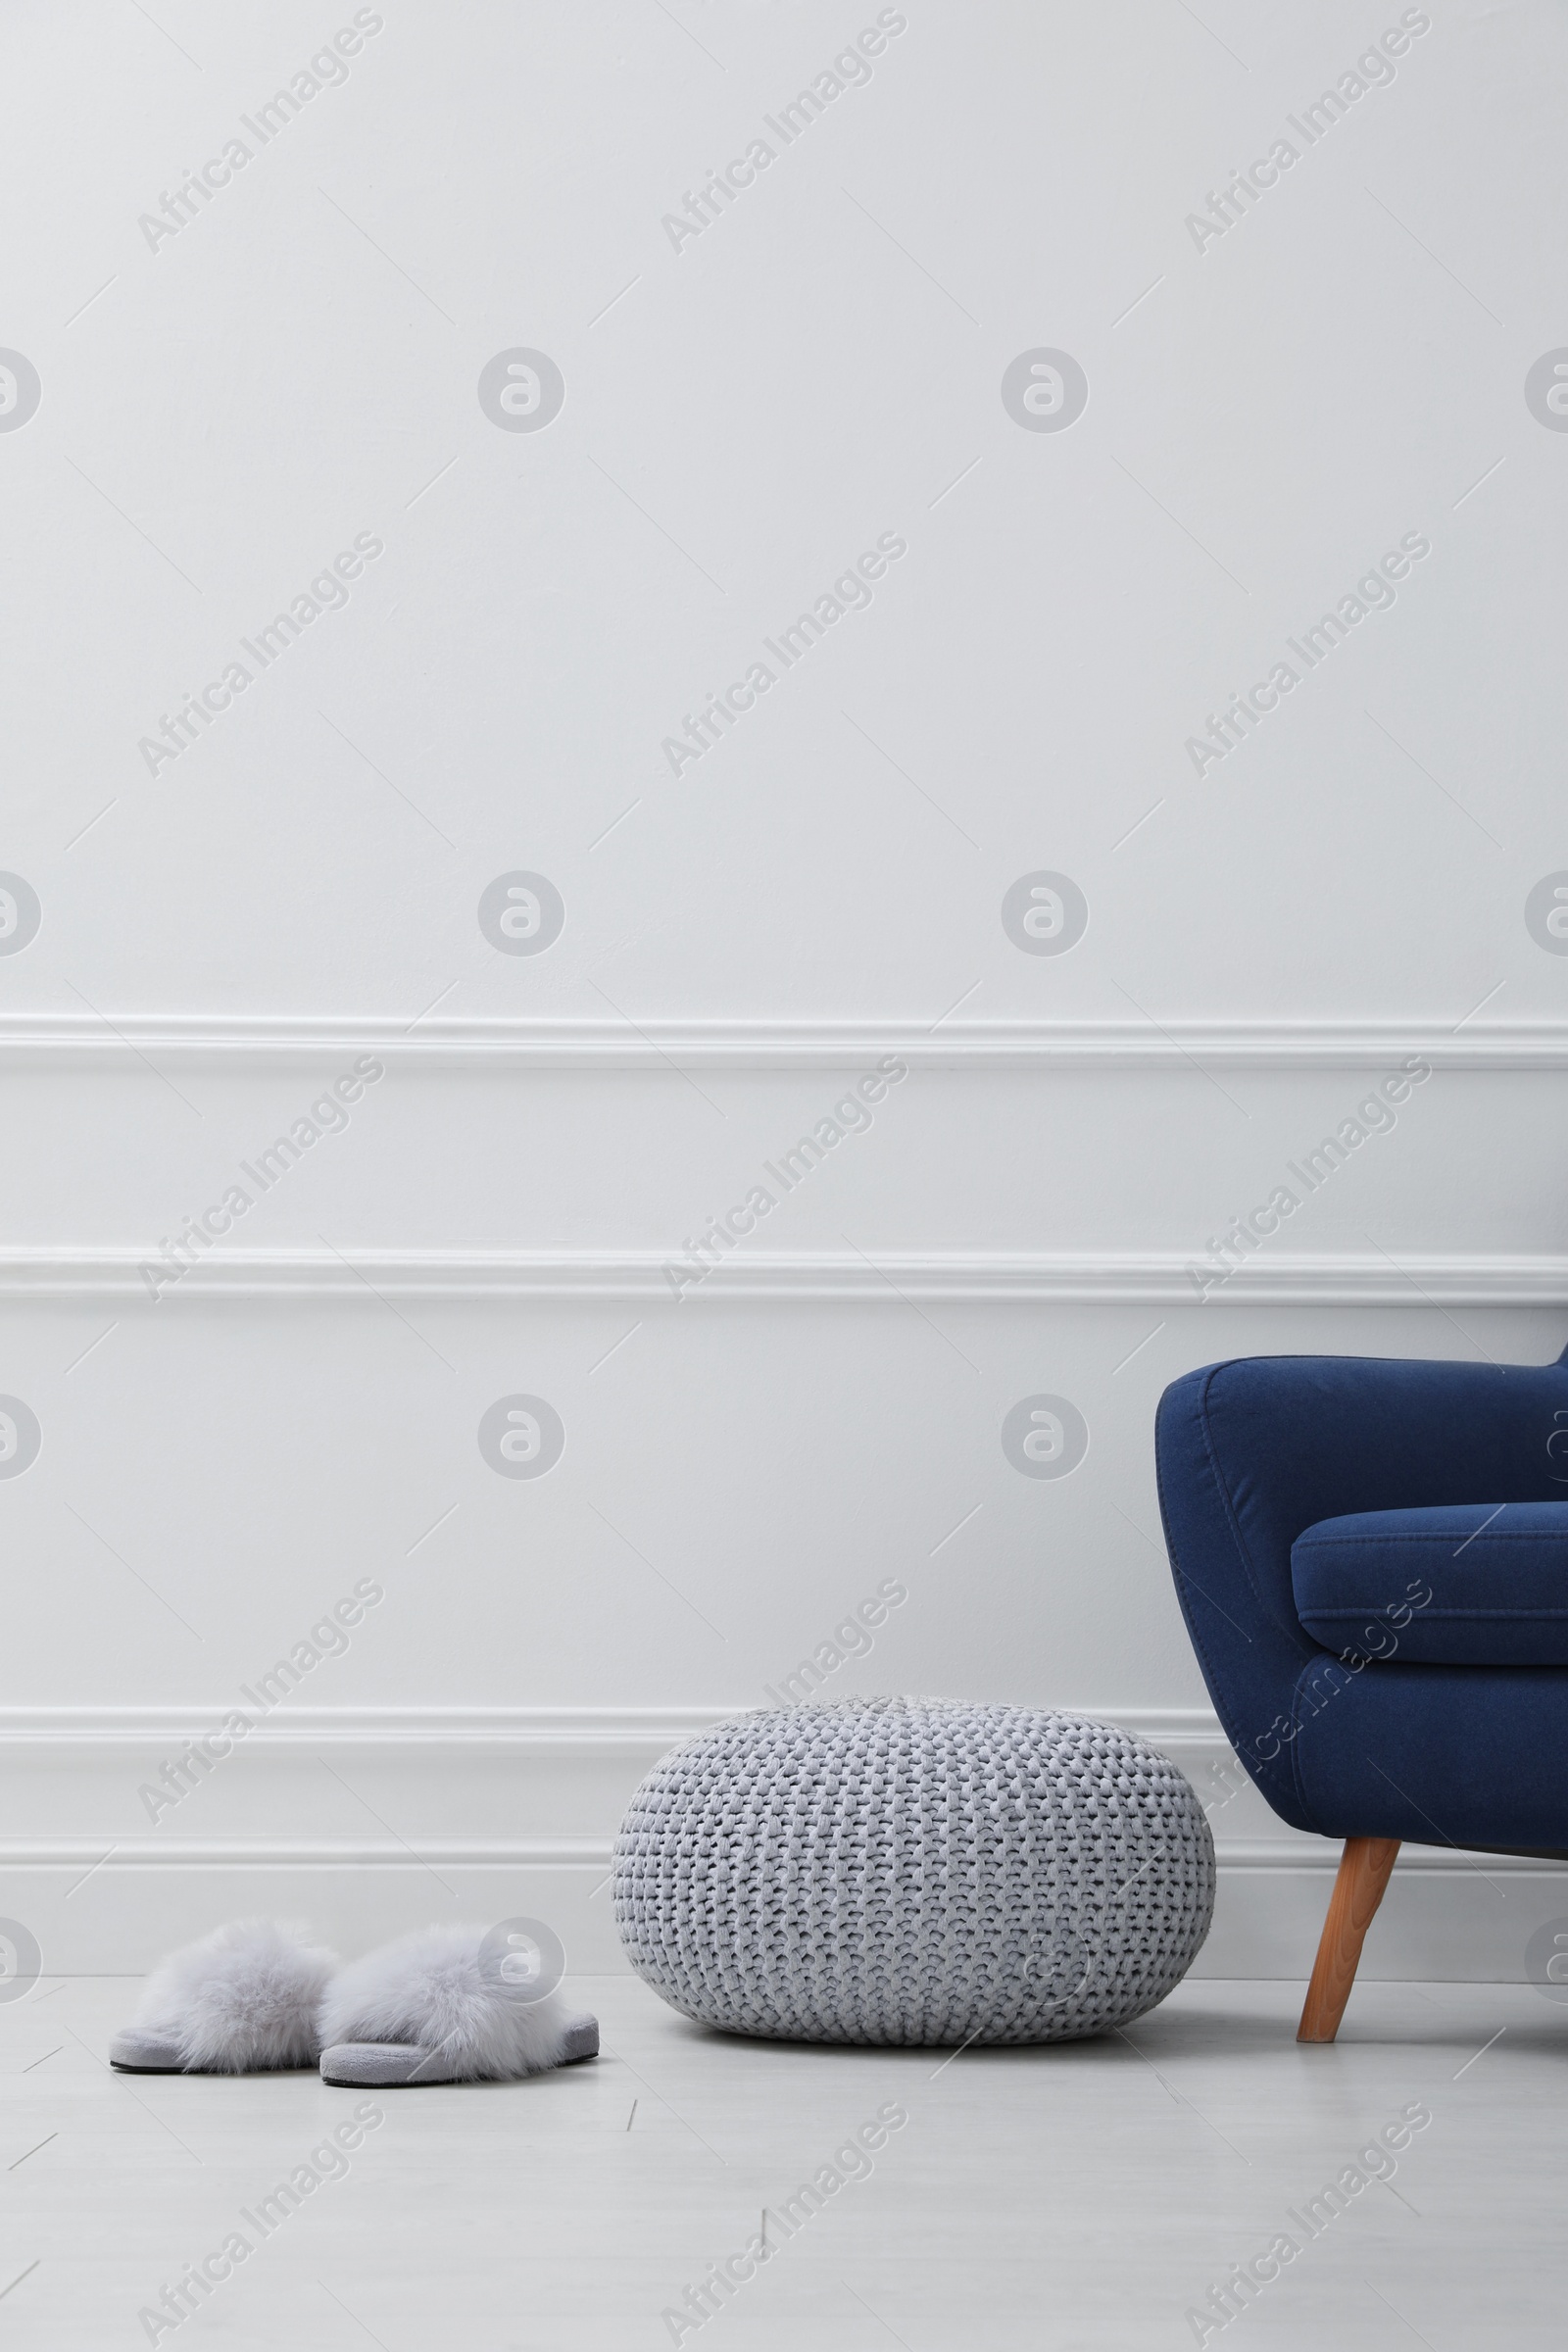 Photo of Knitted pouf, fuzzy slippers and armchair near white wall indoors. Space for text